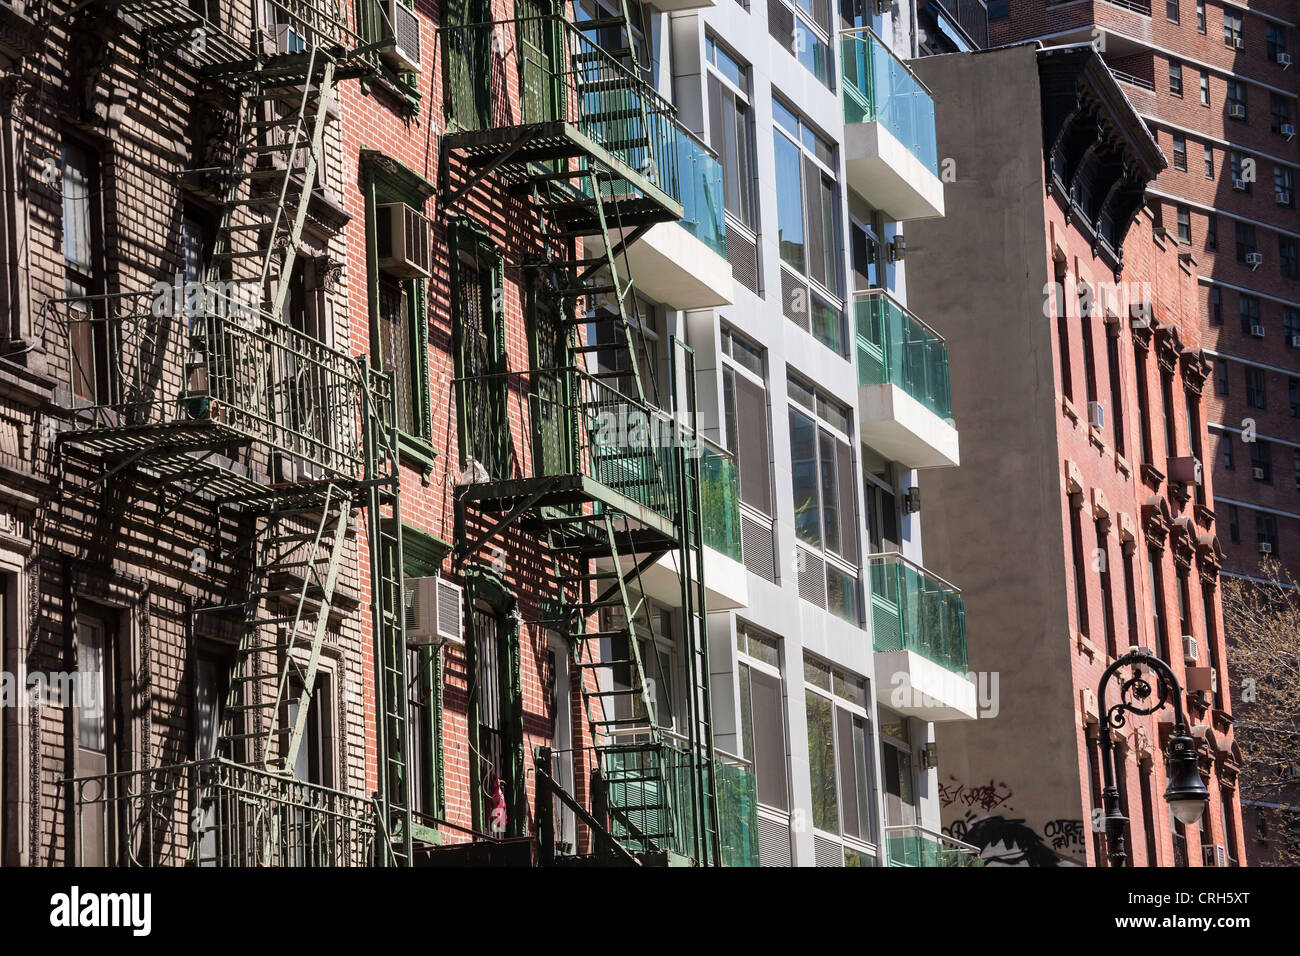 Building Facades, Lower East Side, NYC Stock Photo